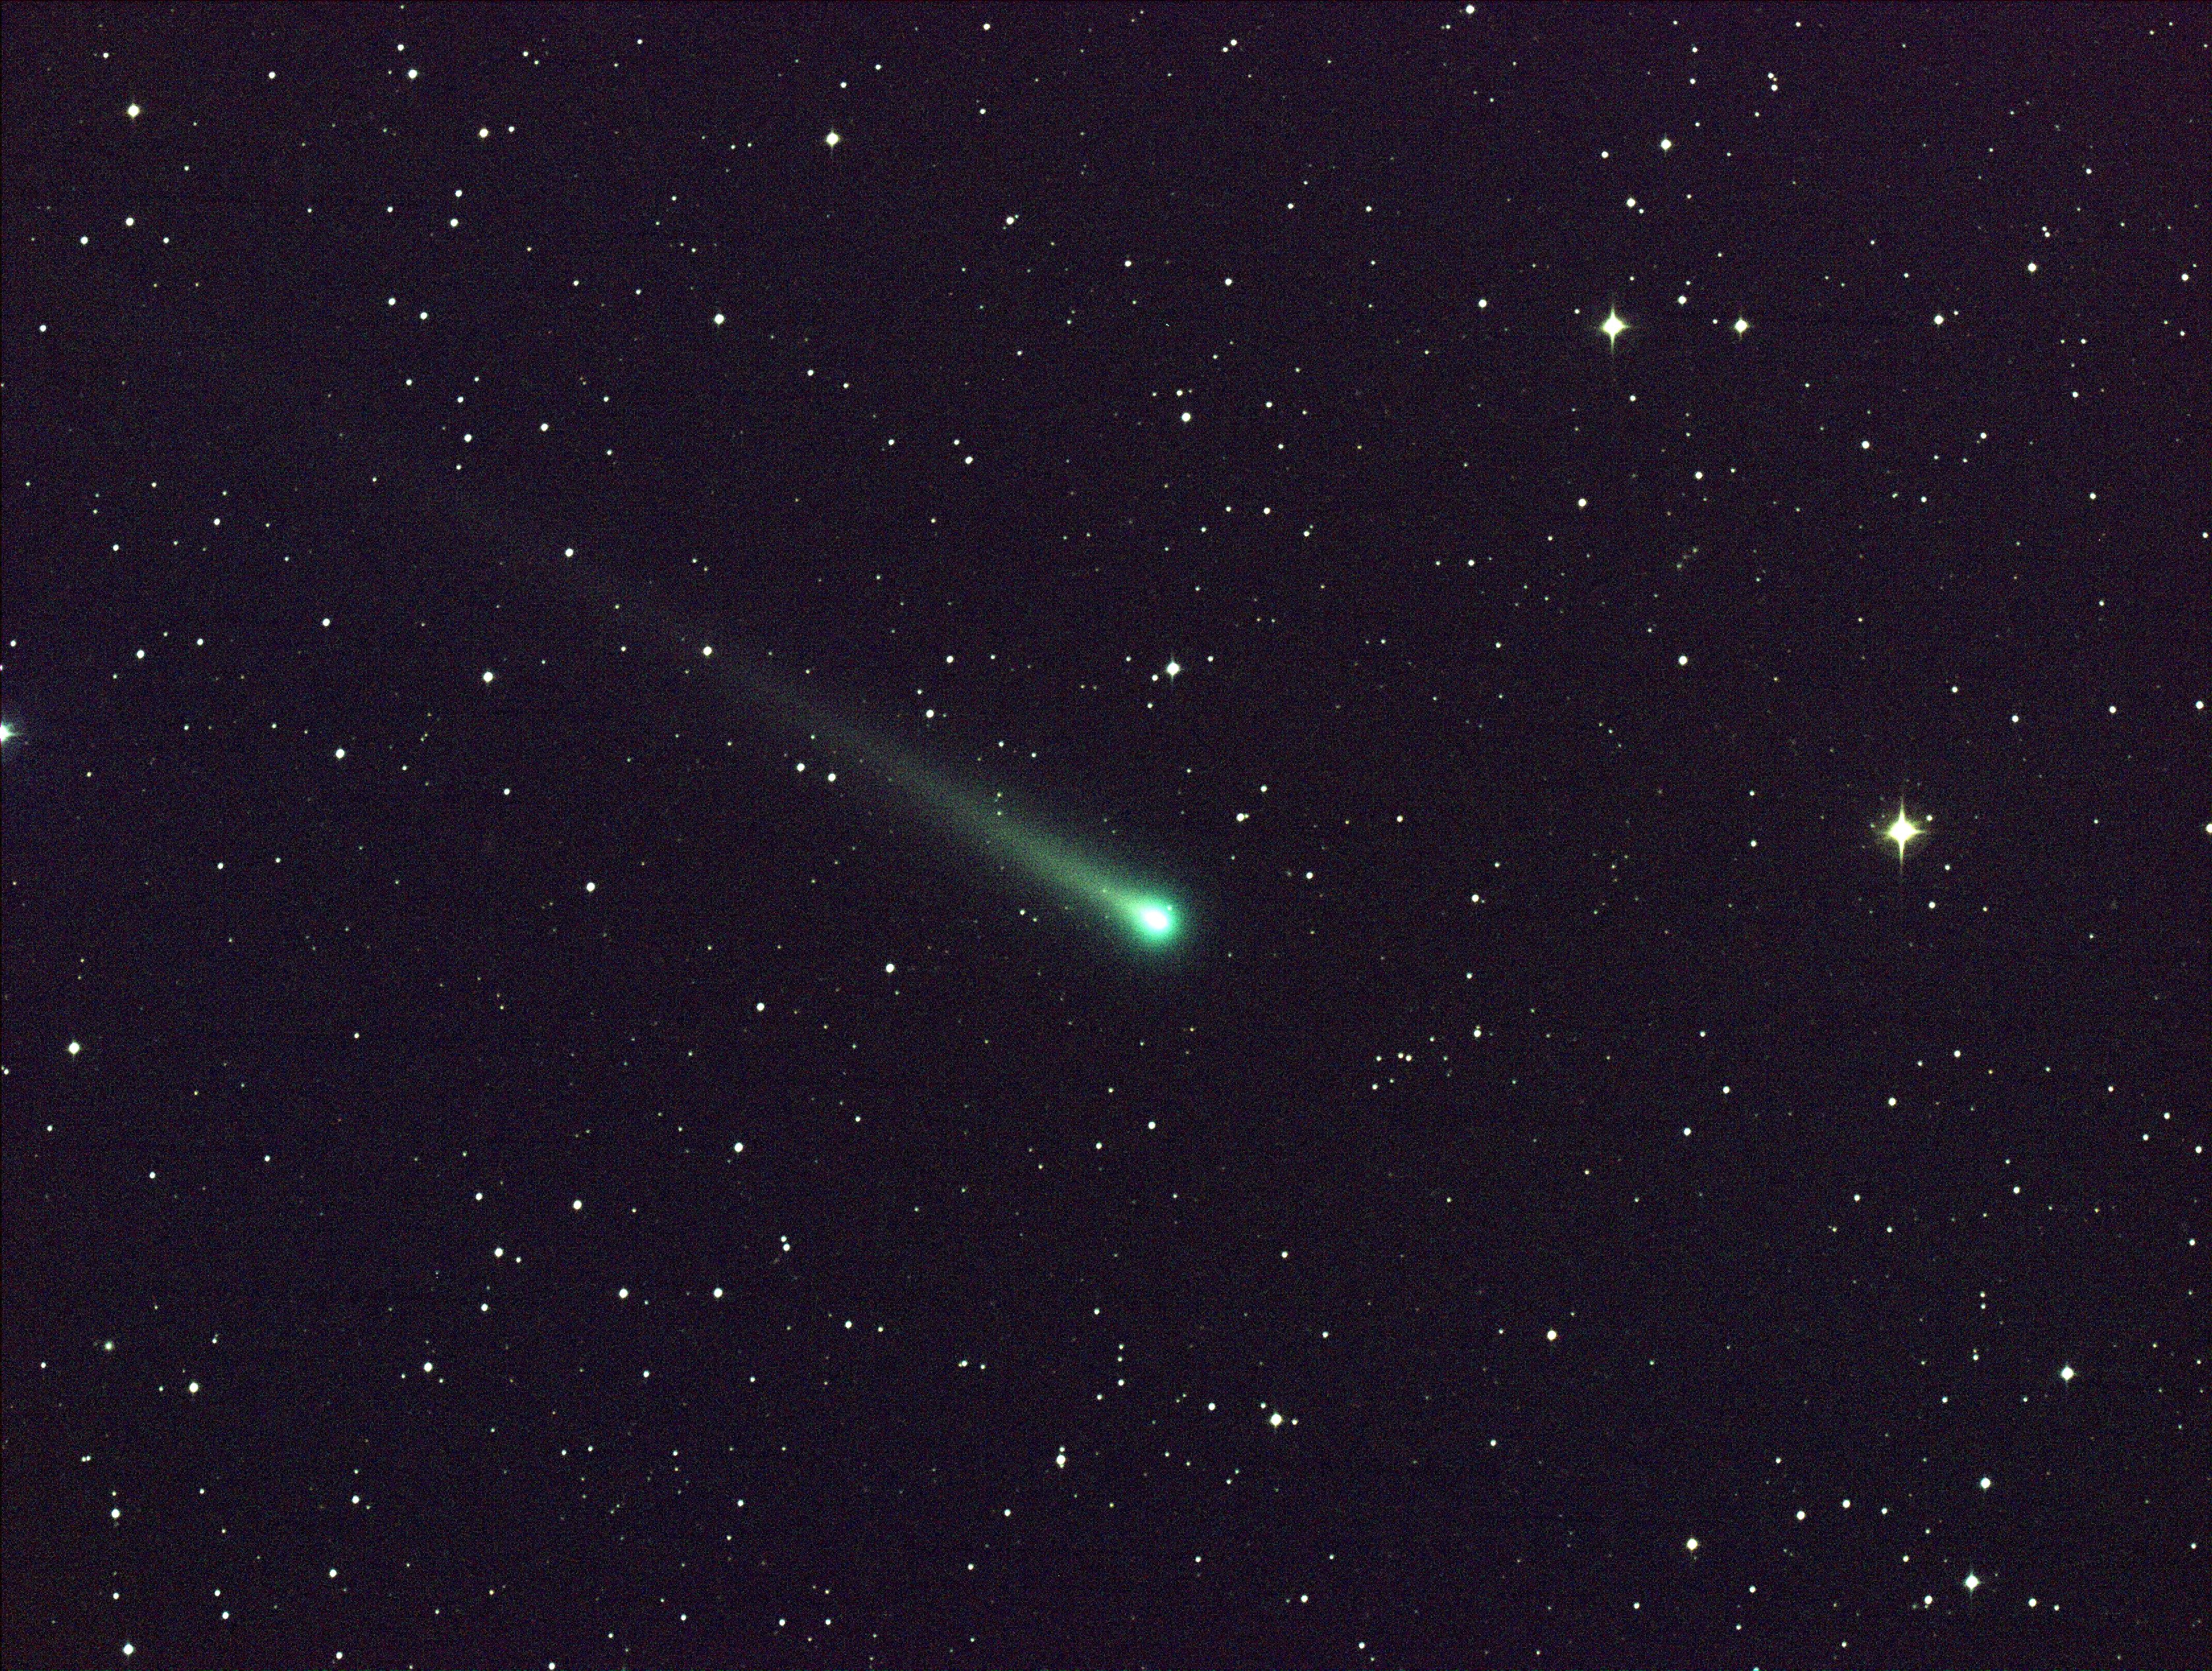 Image of comet ISON in space by NASA